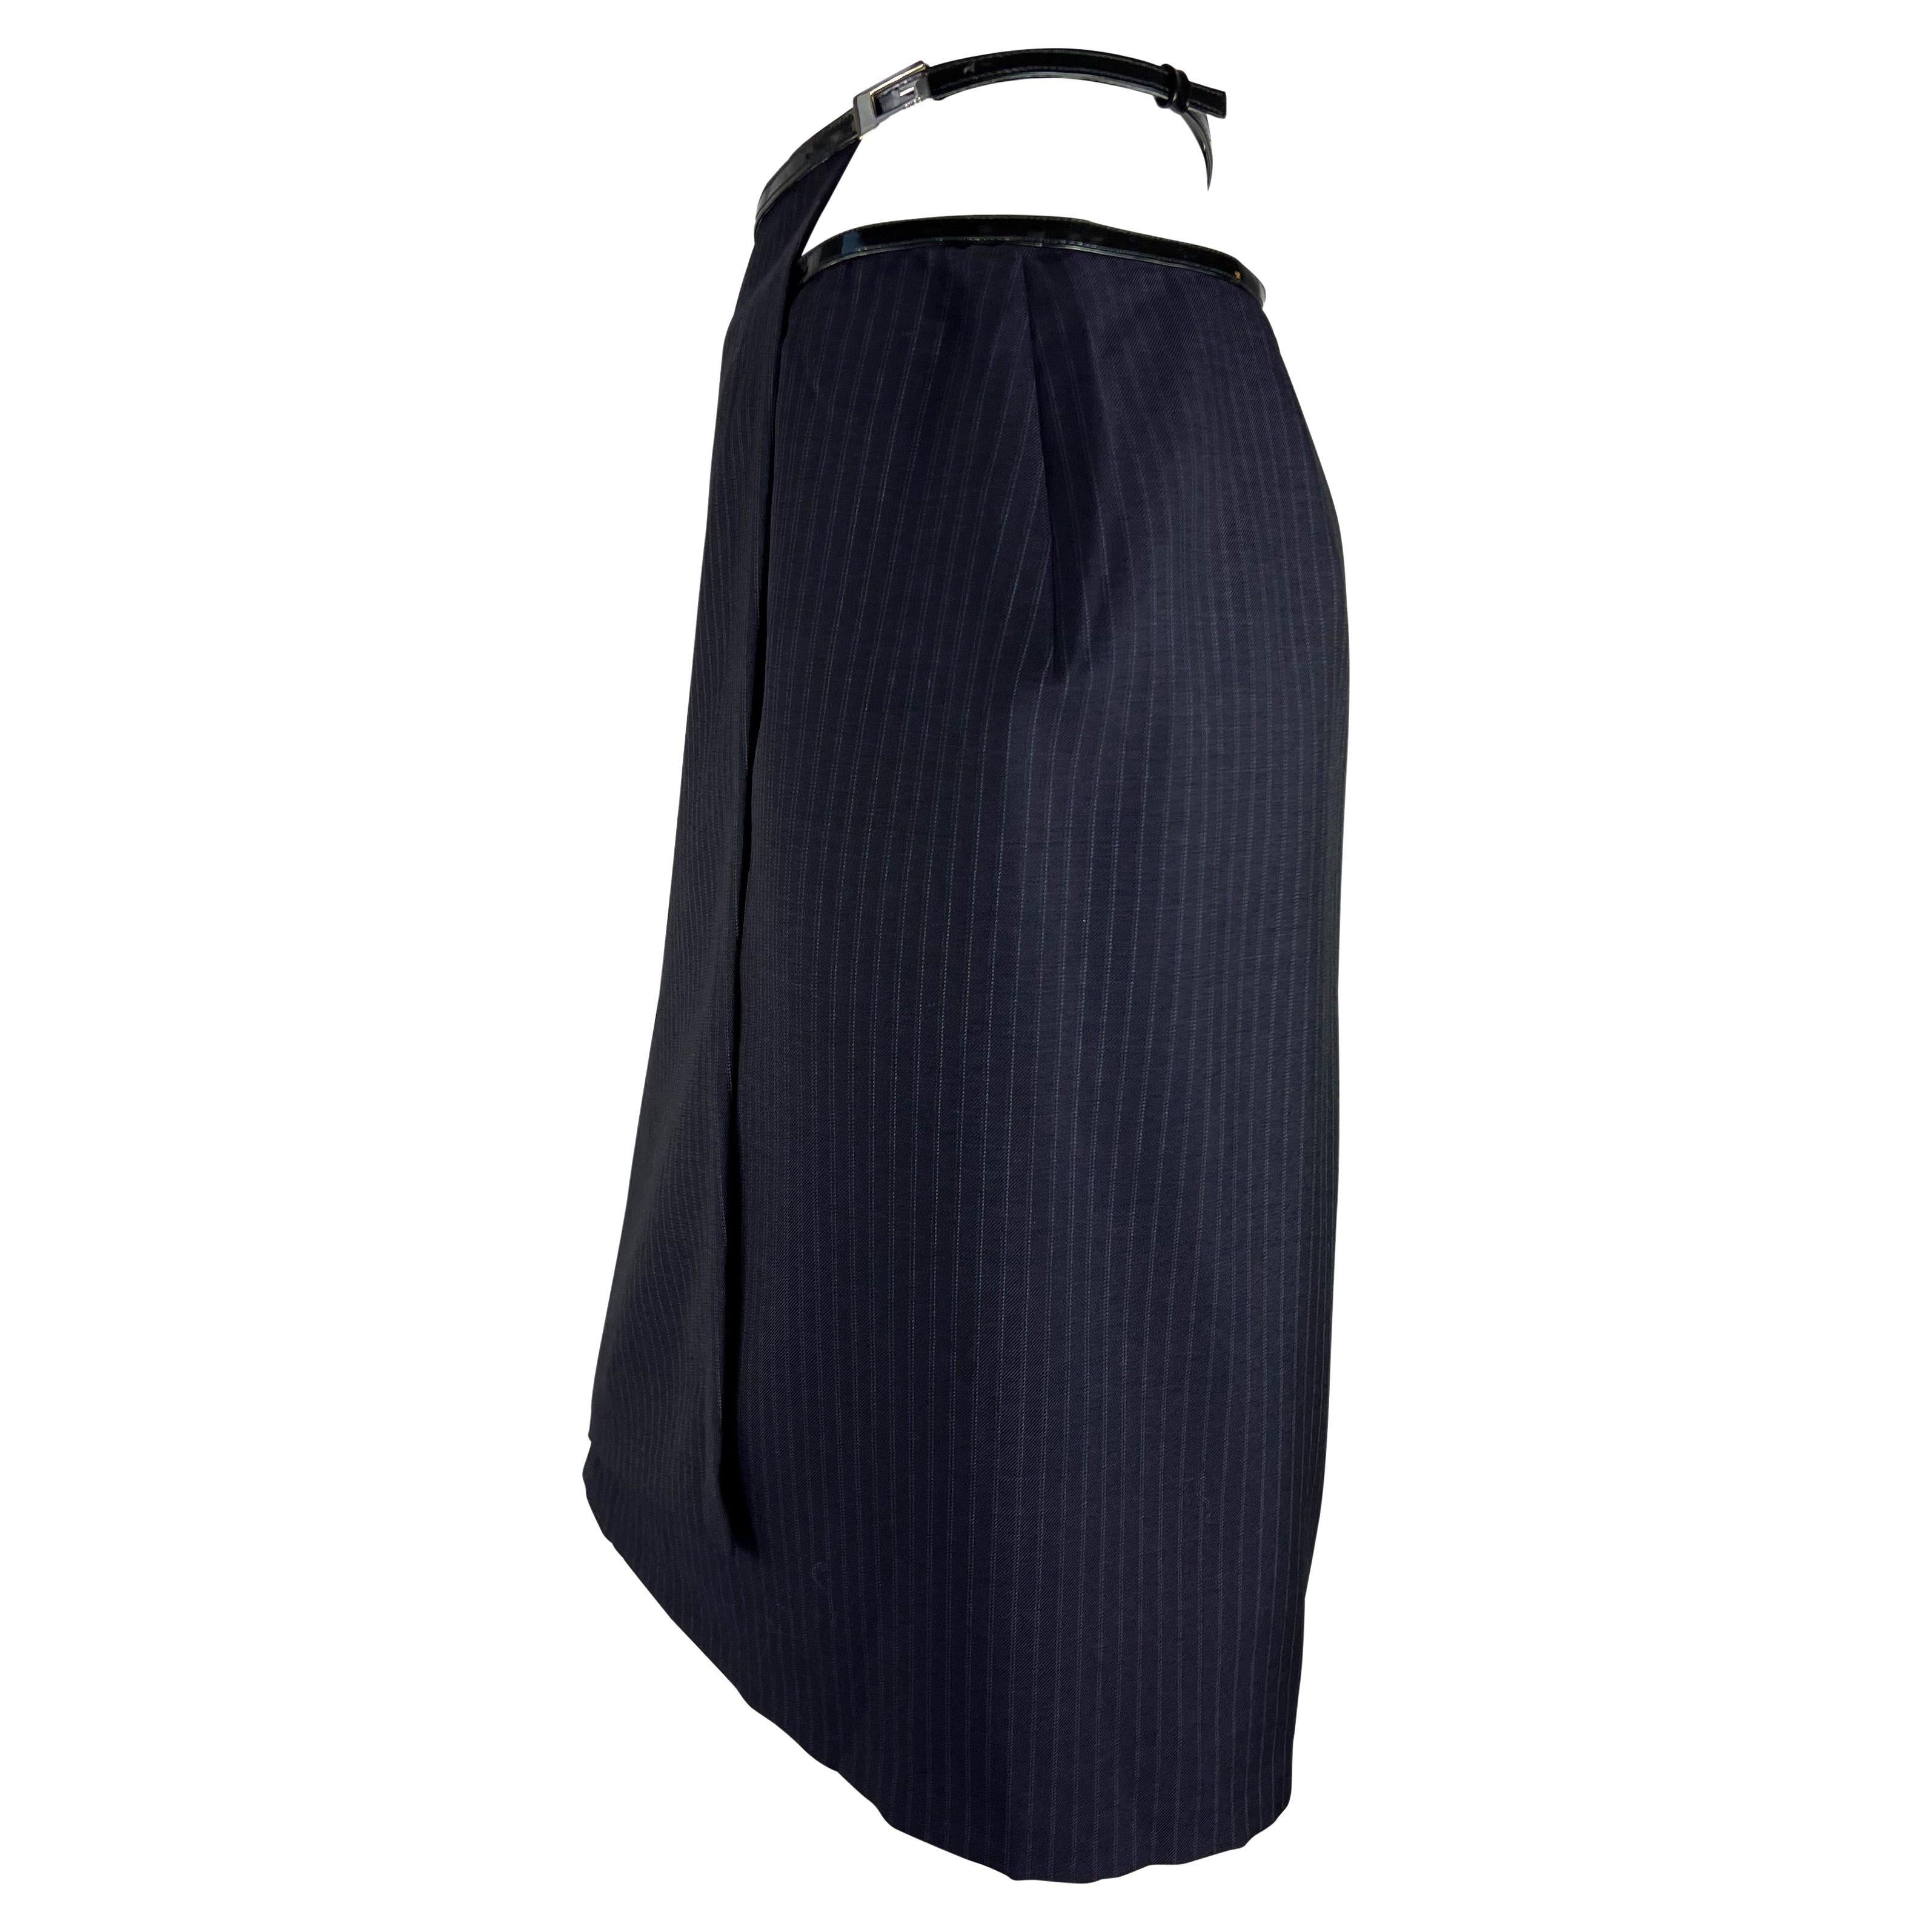 Women's F/W 1997 Gucci by Tom Ford Runway Patent G Buckle Navy Pinstripe Wrap Skirt